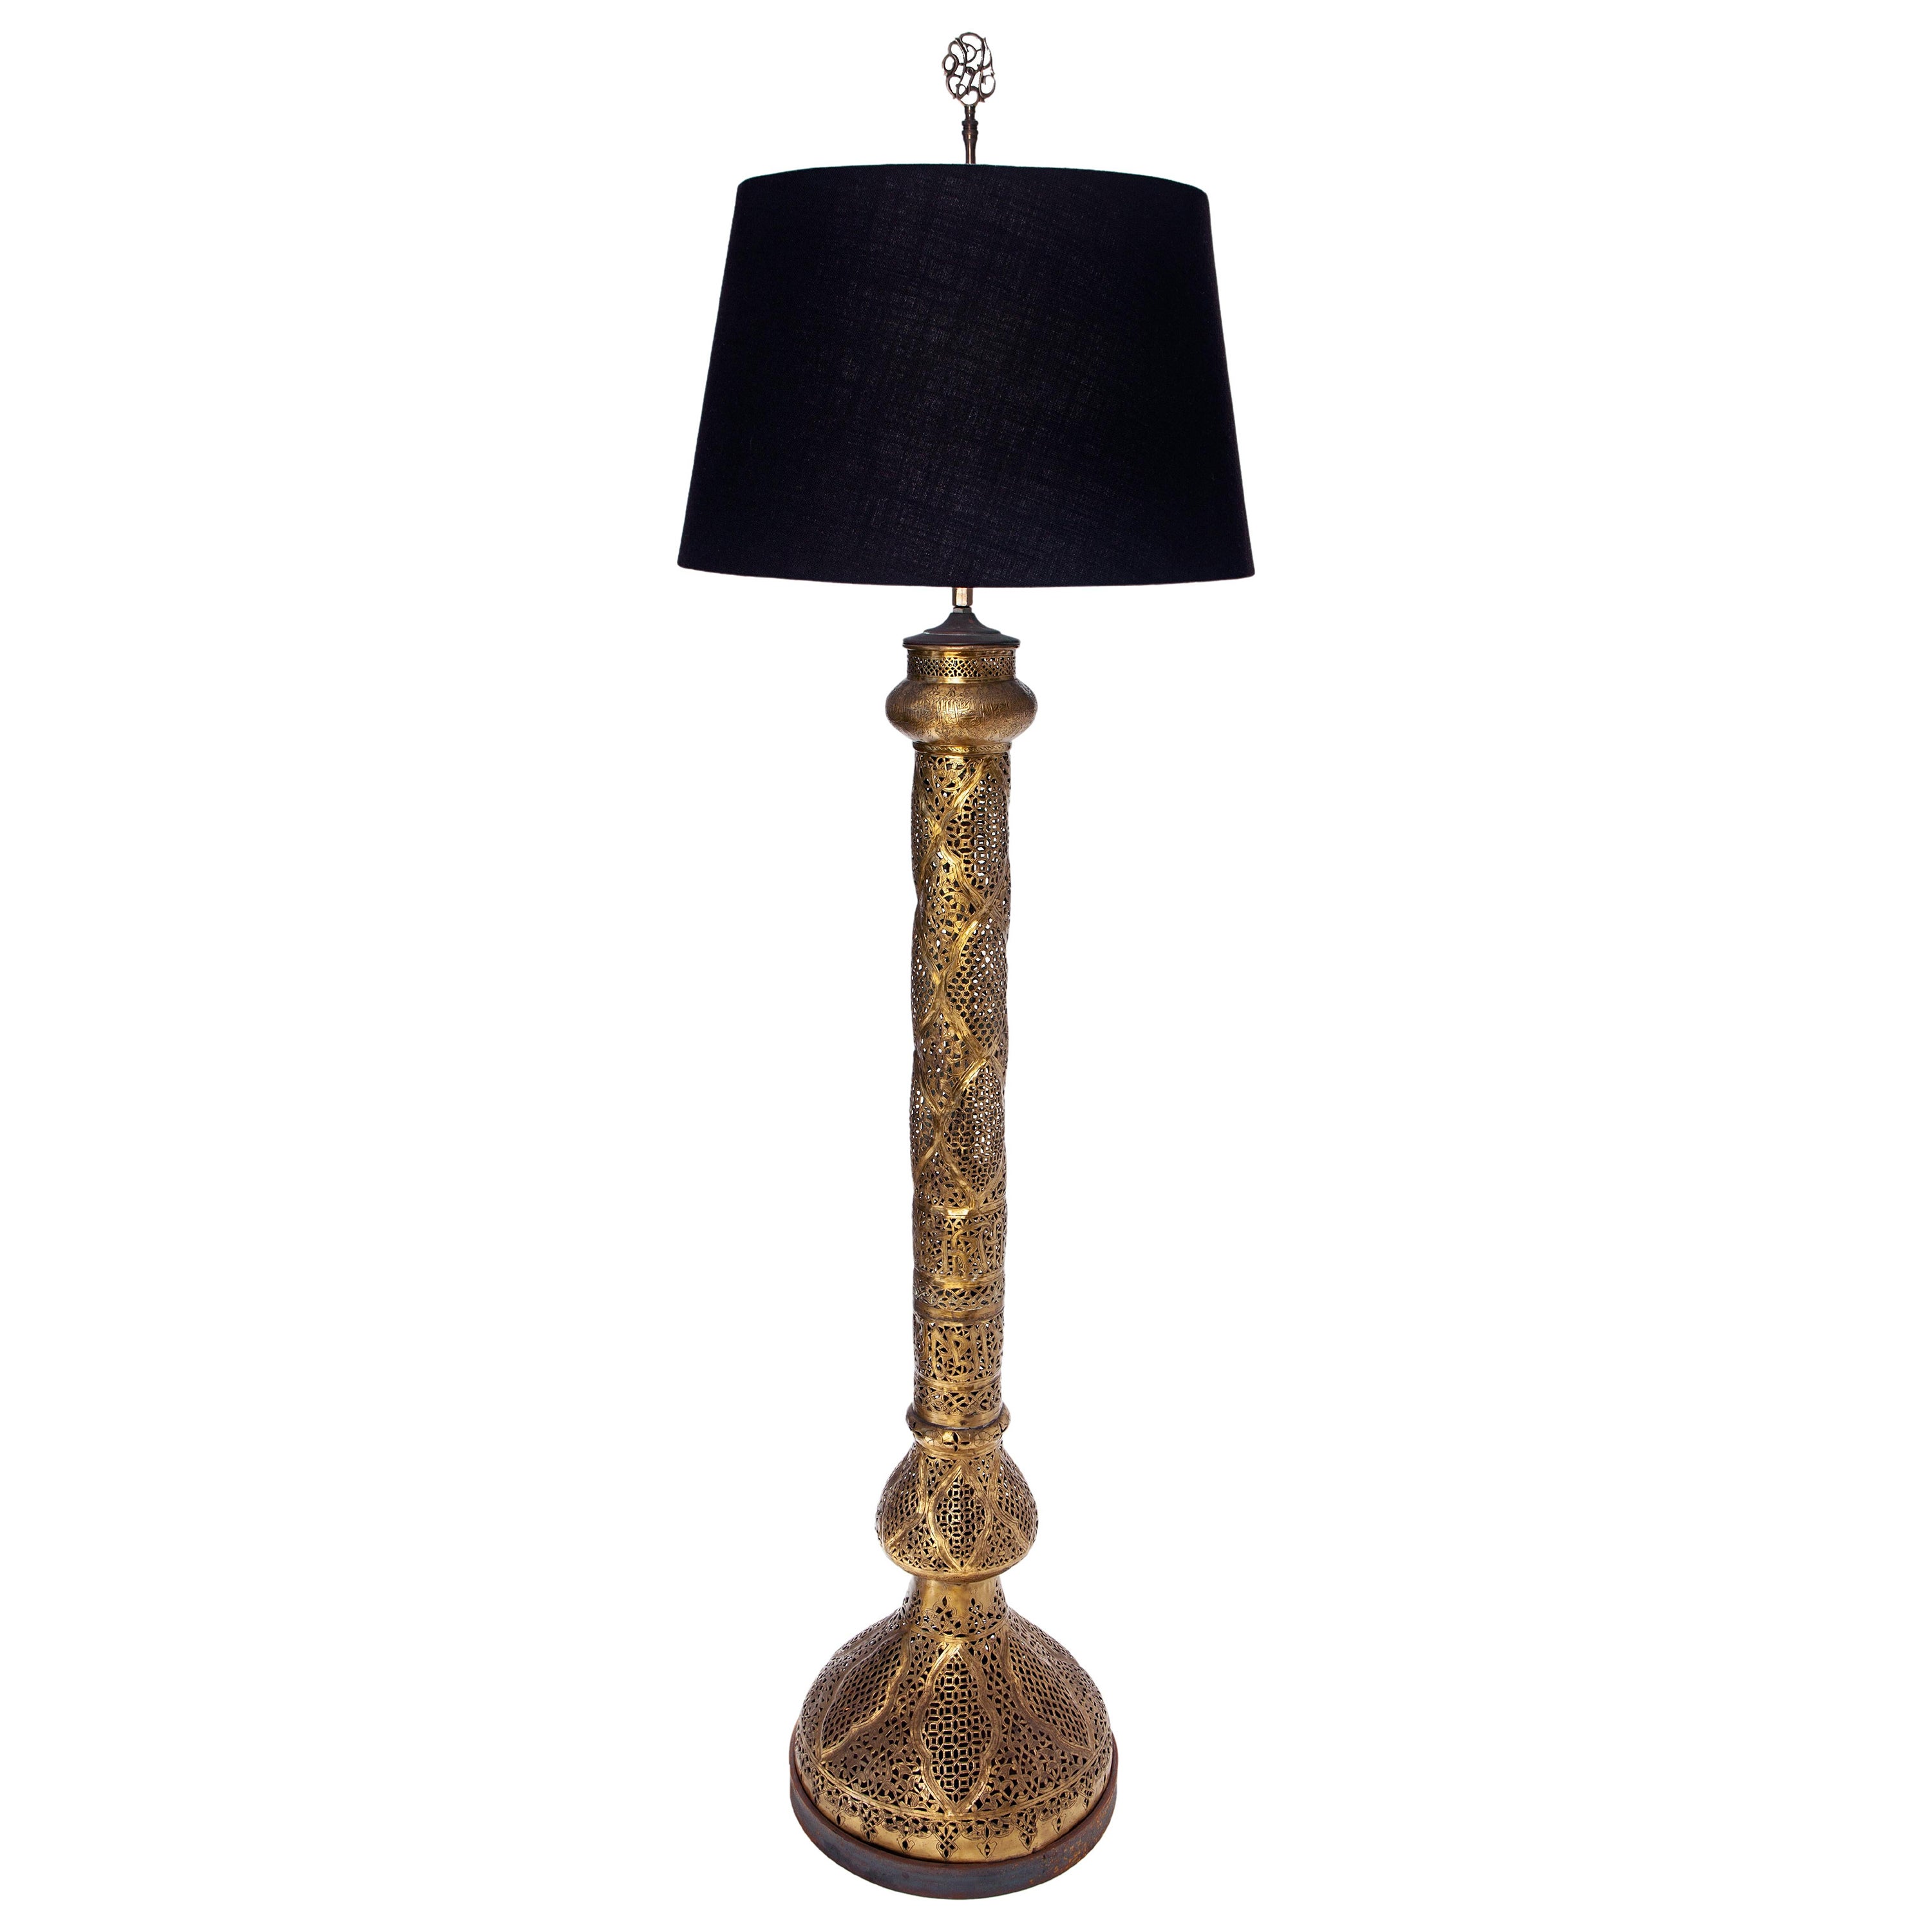 Opulent 20th century Moroccan, Moorish style pierced brass & iron floor lamp.
Handmade with individual patterned panels of pierced foliate & openwork design. 
Rising from wide trumpet base to a tapering cylinder with decorative collars & flared rim.